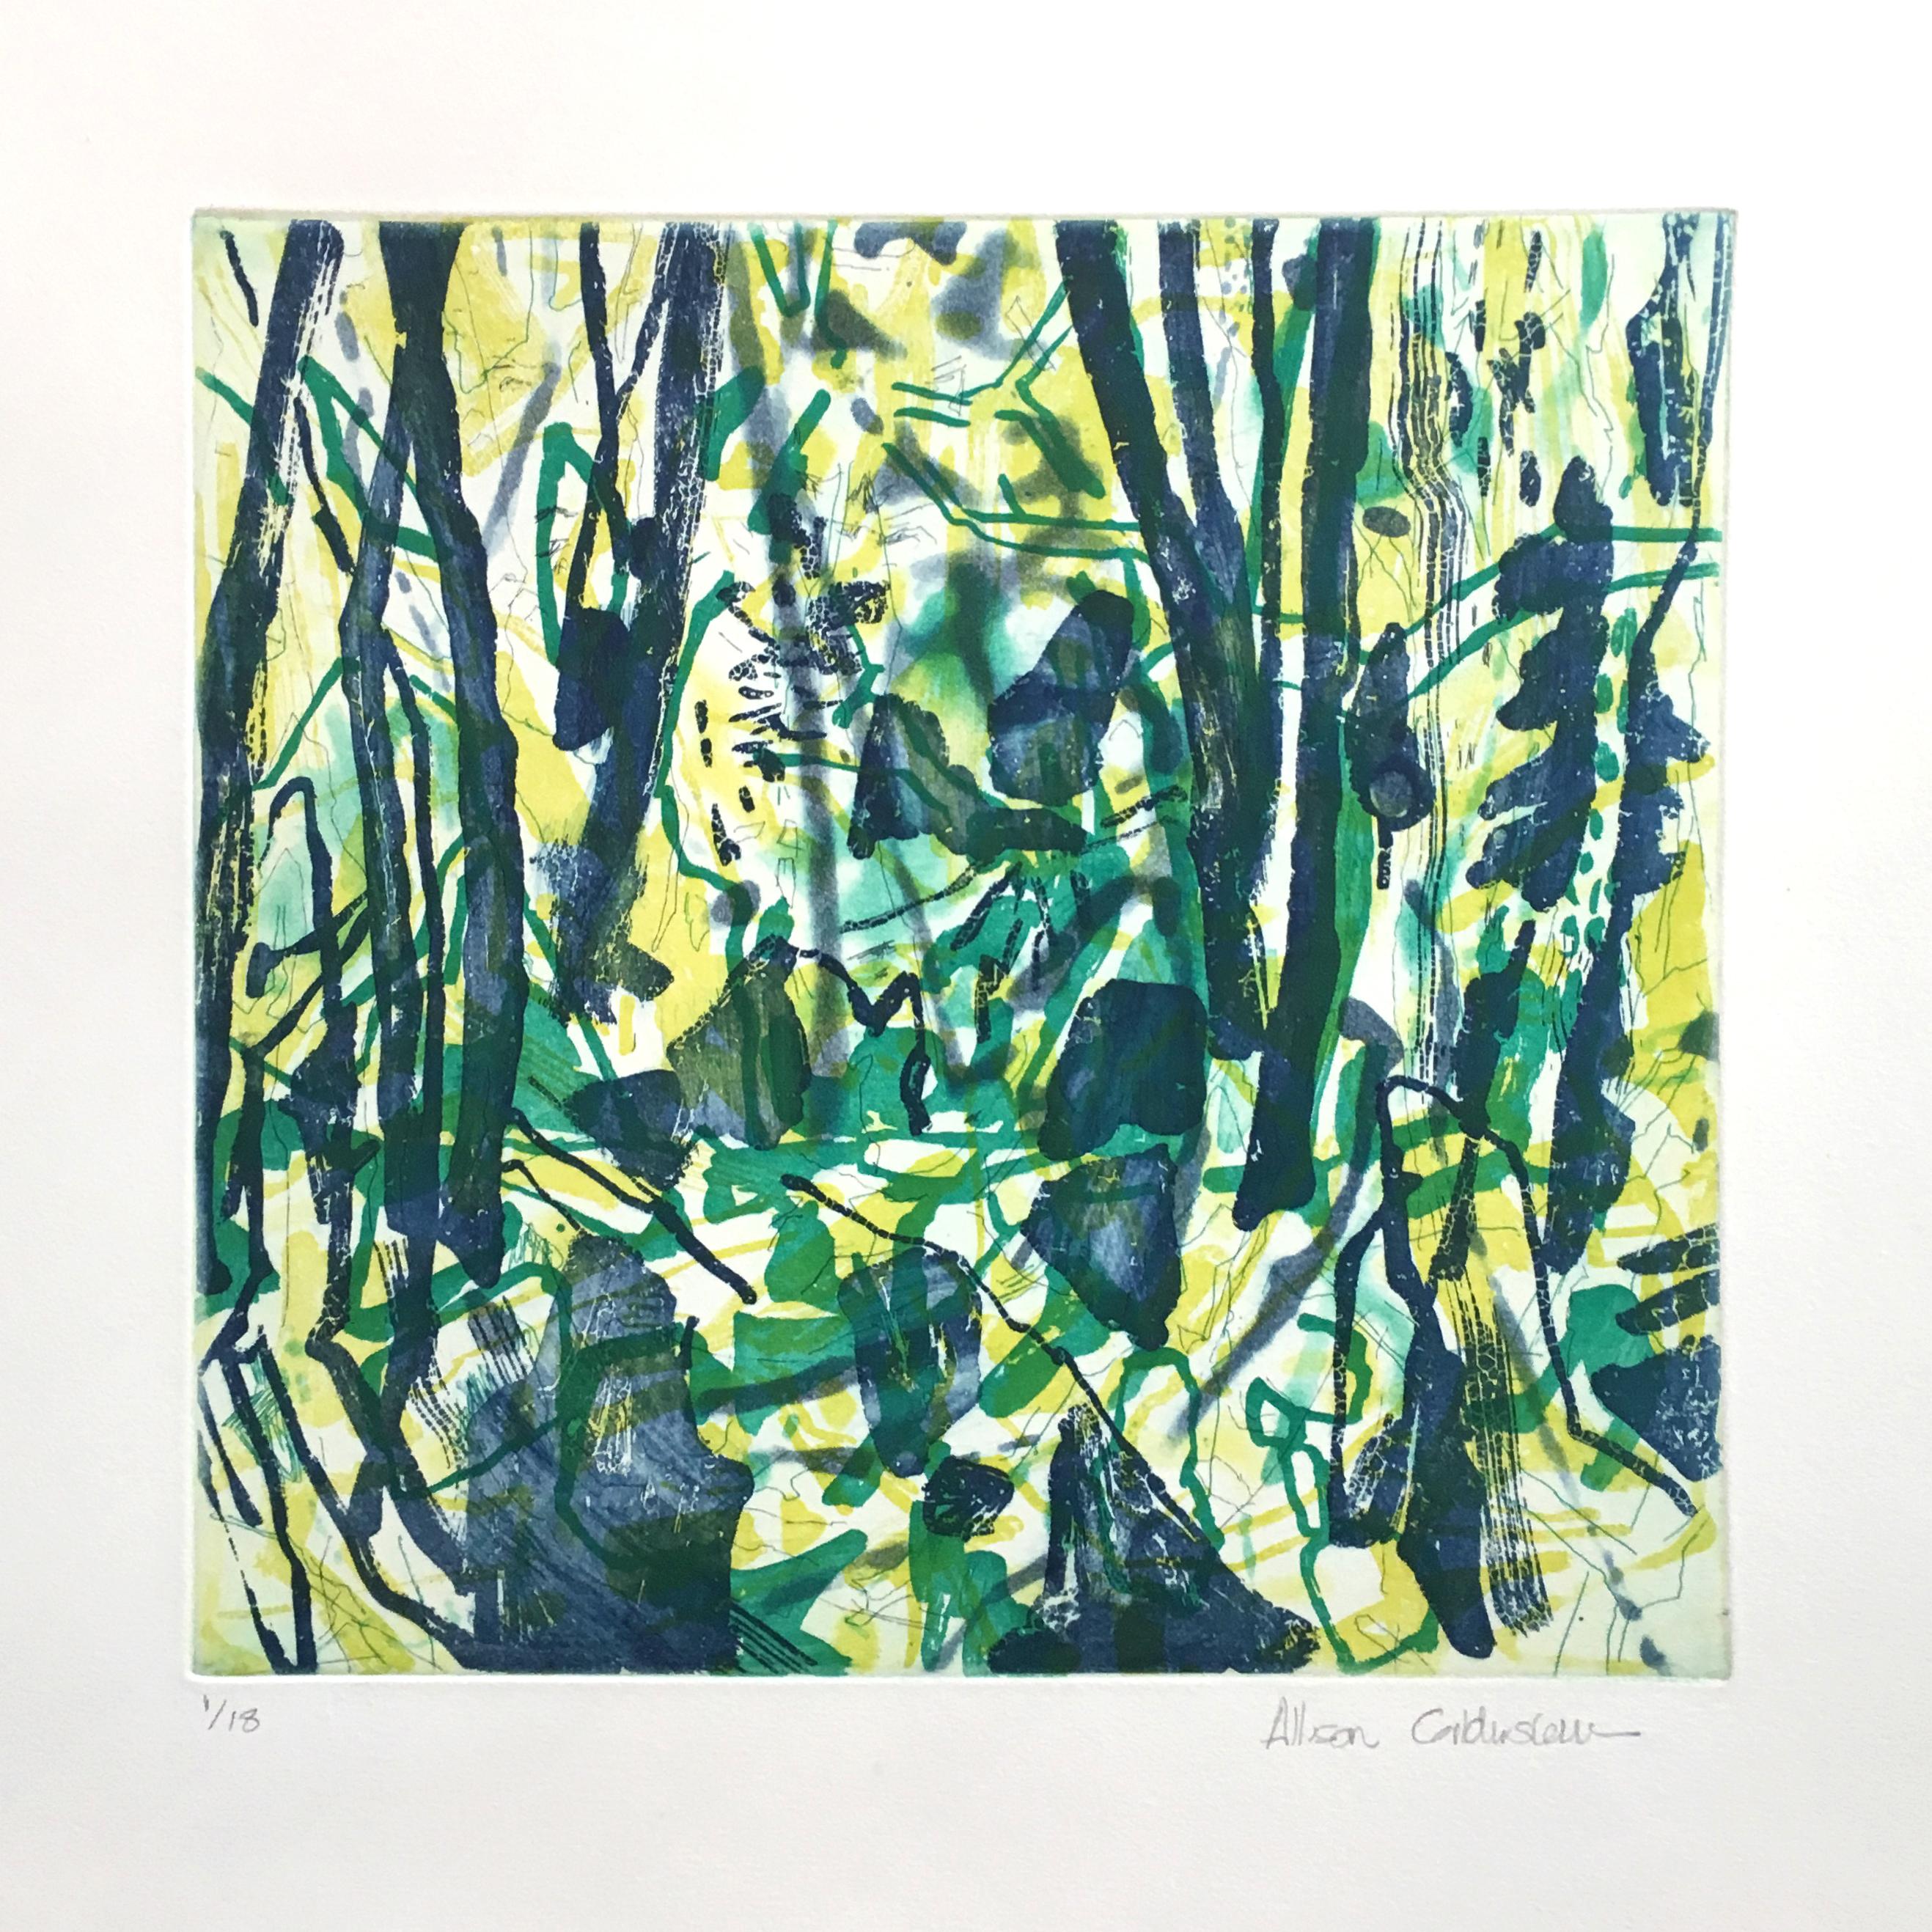 Allison Gildersleeve
Untitled, Green (2017)
Etching on Rives BFK paper
Image size: 12 x 12 inches
Paper: 26 x 19 ½ inches
Edition of 18
Published by Eminence Grise Editions
Printed by Marjorie Van Dyke